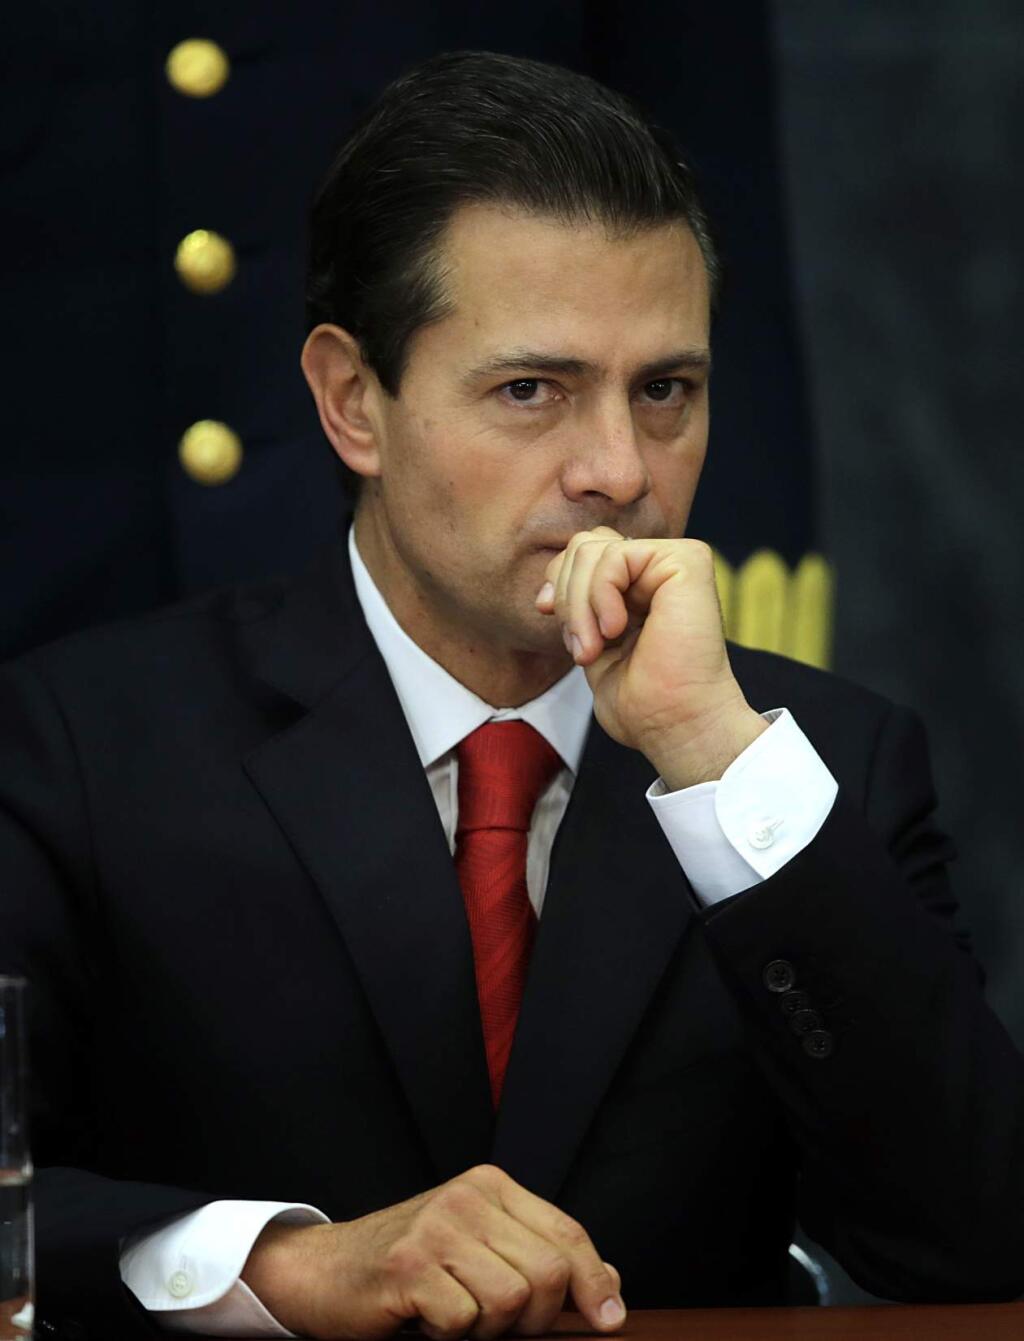 Mexico's President Enrique Pena Nieto pauses during a press conference at Los Pinos presidential residence in Mexico City, Monday, Jan. 23, 2017. Pena Nieto said Monday that Mexico's attitude towards the Donald Trump administration should not be aggressive or biased, but one of dialogue. (AP Photo/Marco Ugarte)